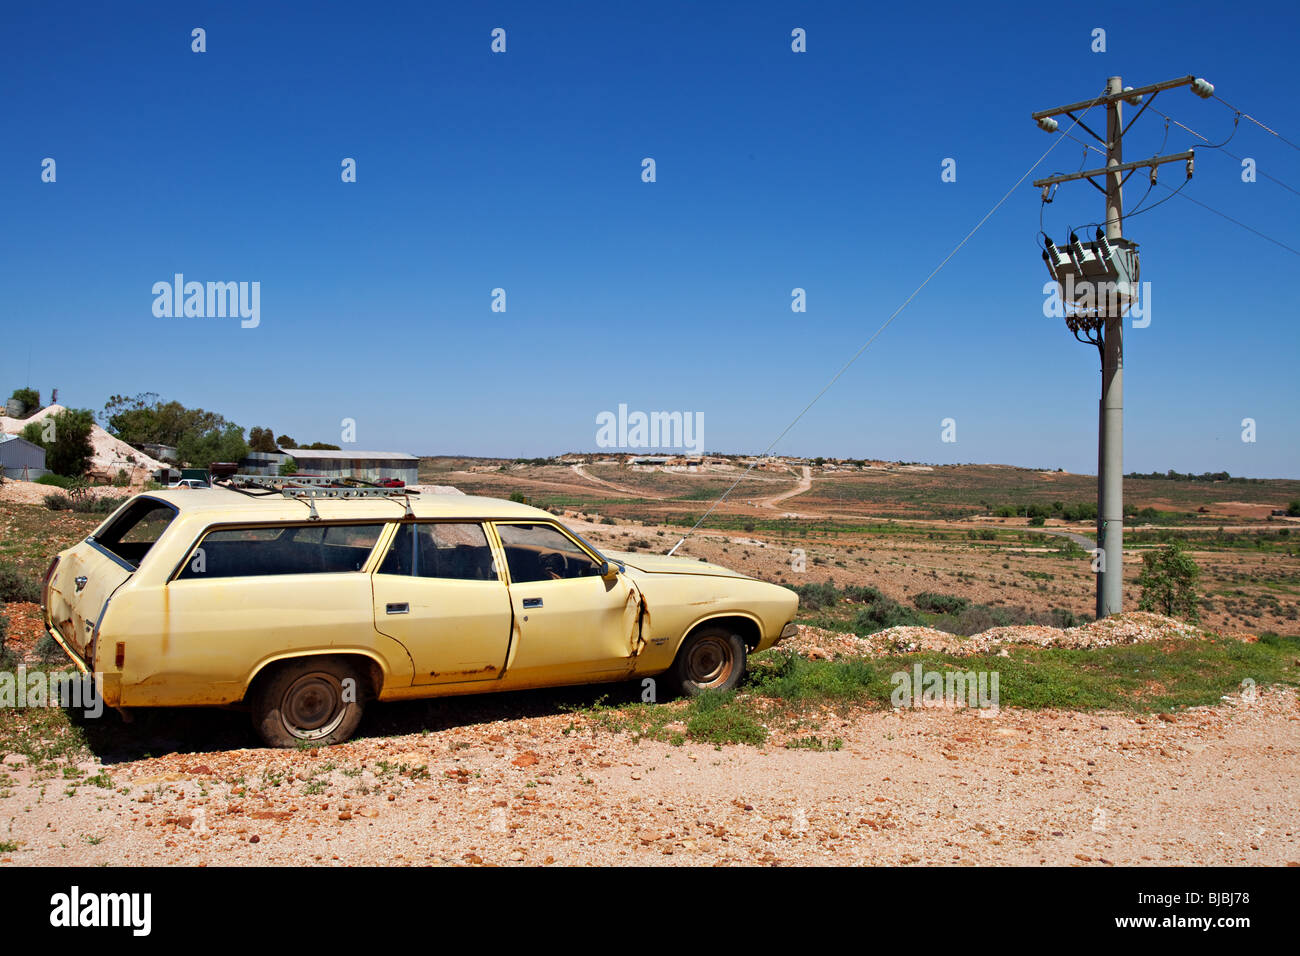 An old abandoned car in an Australian outback town of White Cliffs Stock Photo